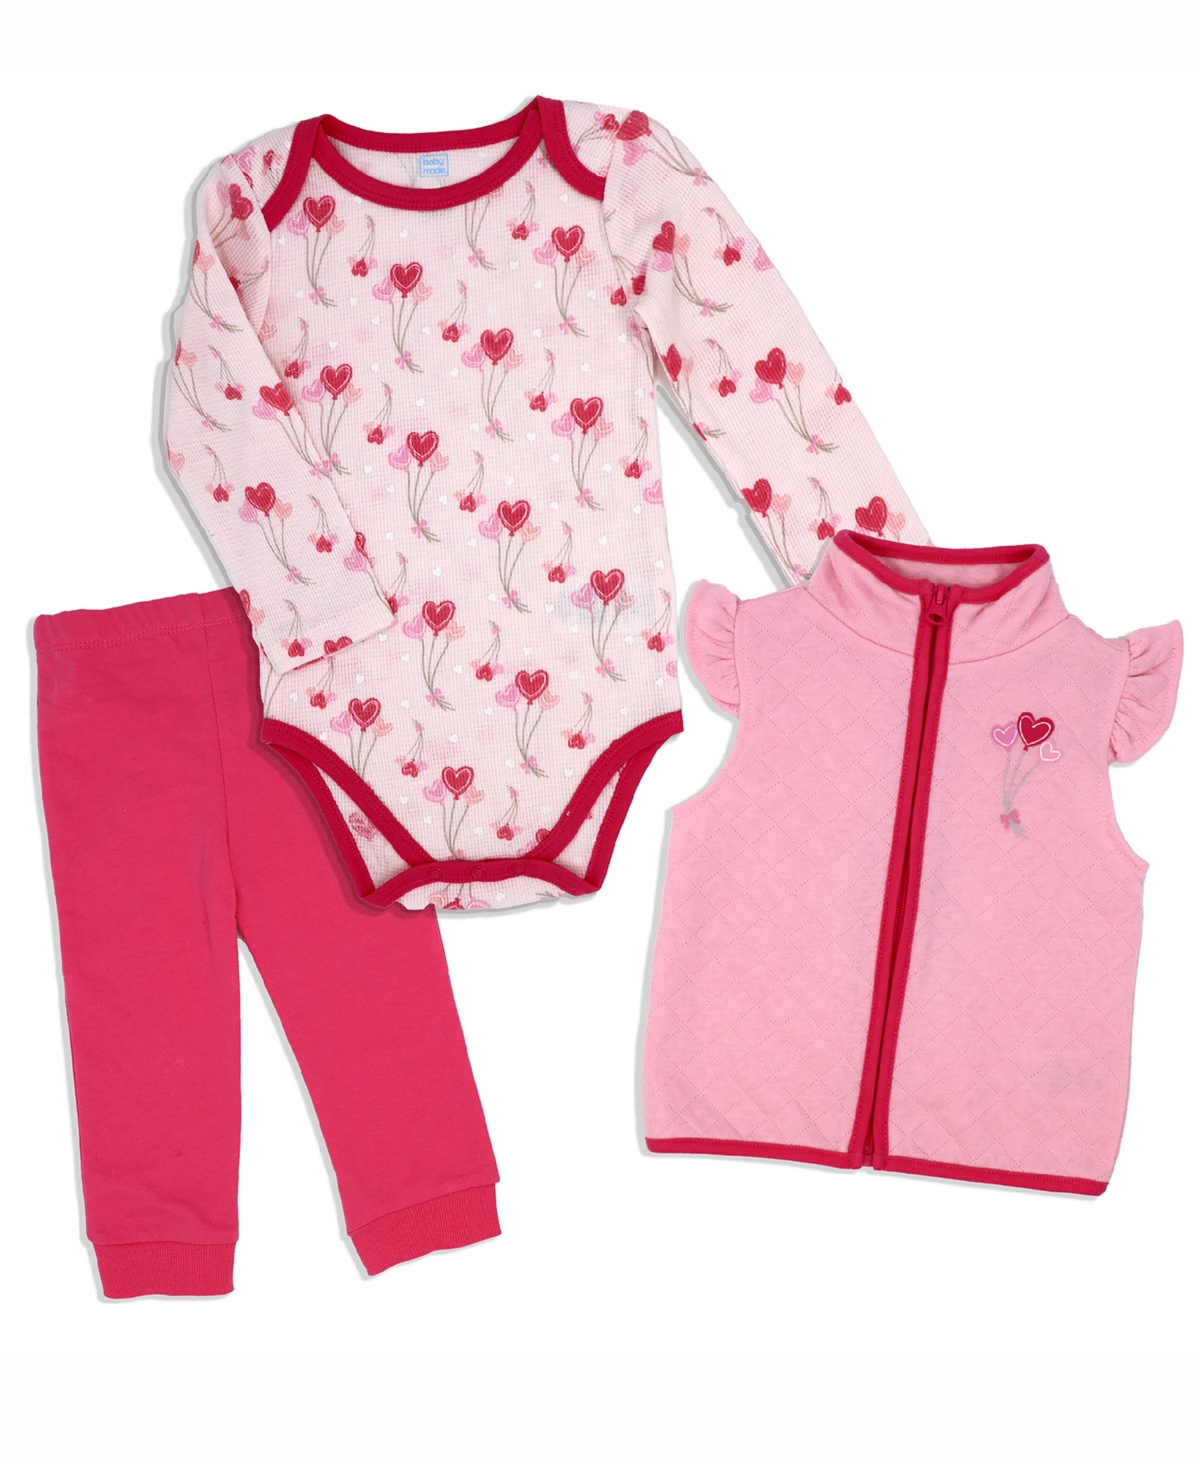 Baby Mode Baby Girls Hearts Bodysuit, Pants And Vest, 3 Piece Set In Fuchsia